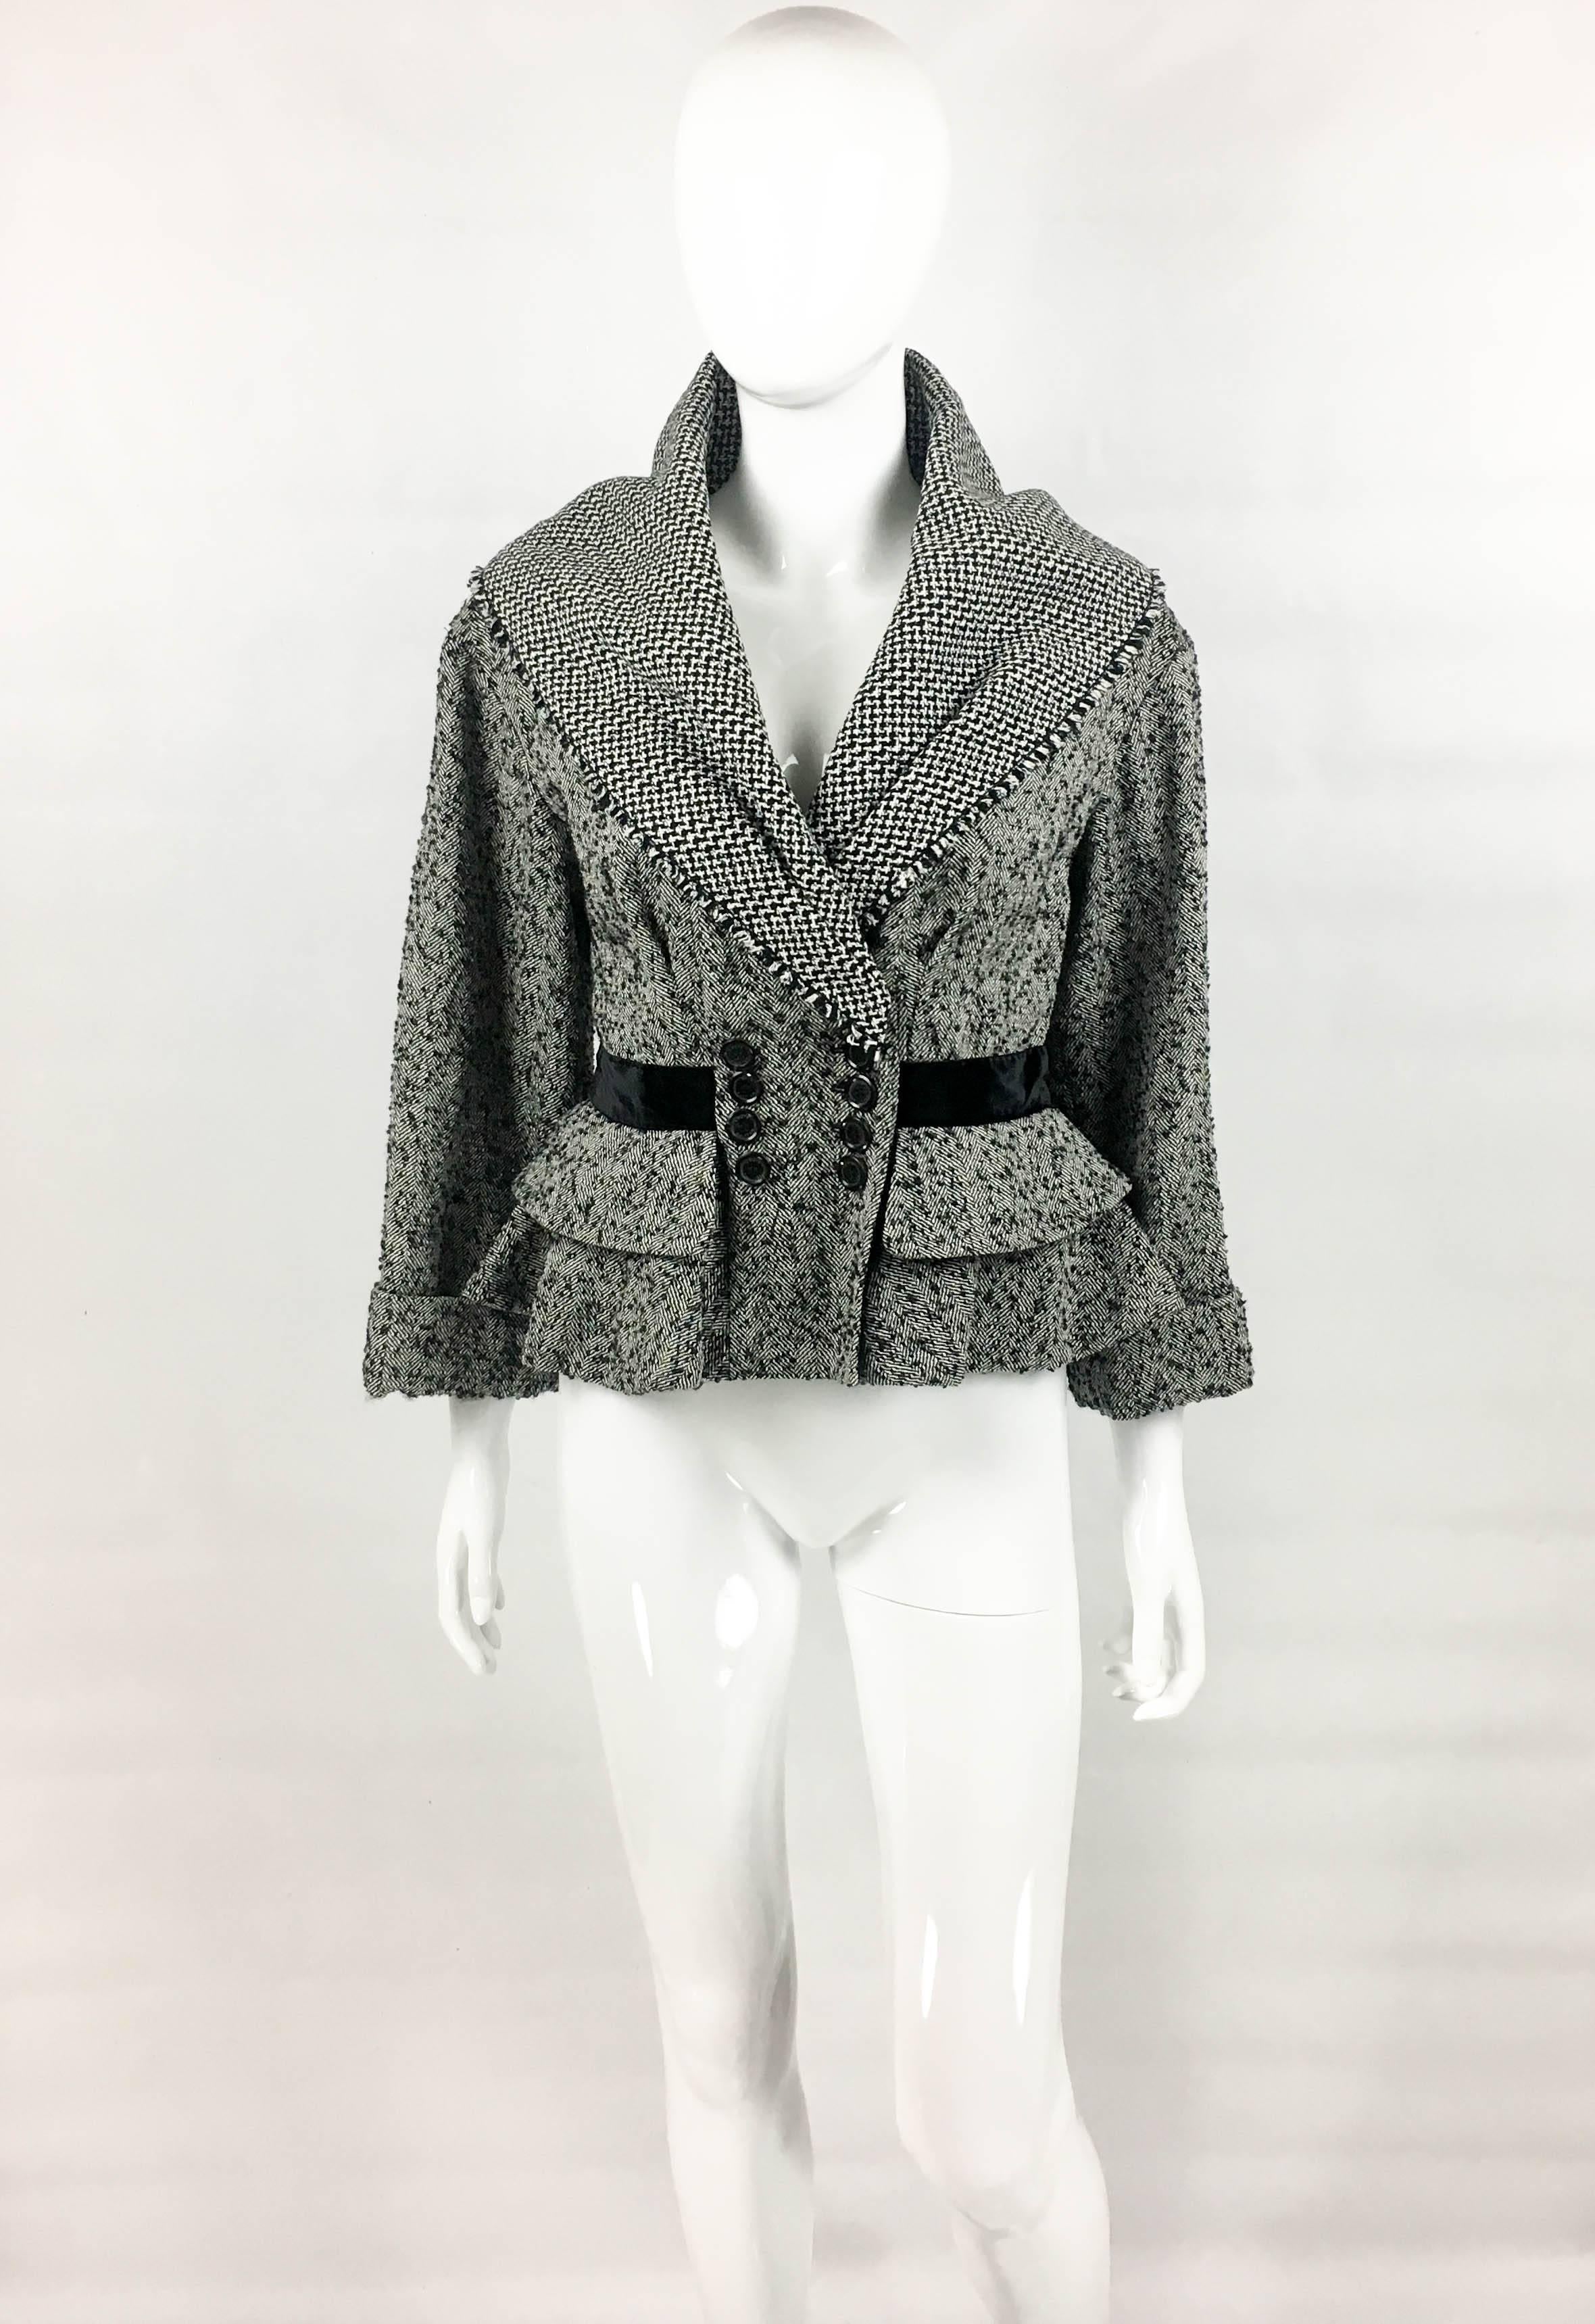 Striking Louis Vuitton Black and White Tweed Jacket. This fabulous jacket is from the Mark Jacobs’ era at Louis Vuitton. Made in black and white flacked wool and silk blend tweed, it features a dramatic collar draping over the shoulders.